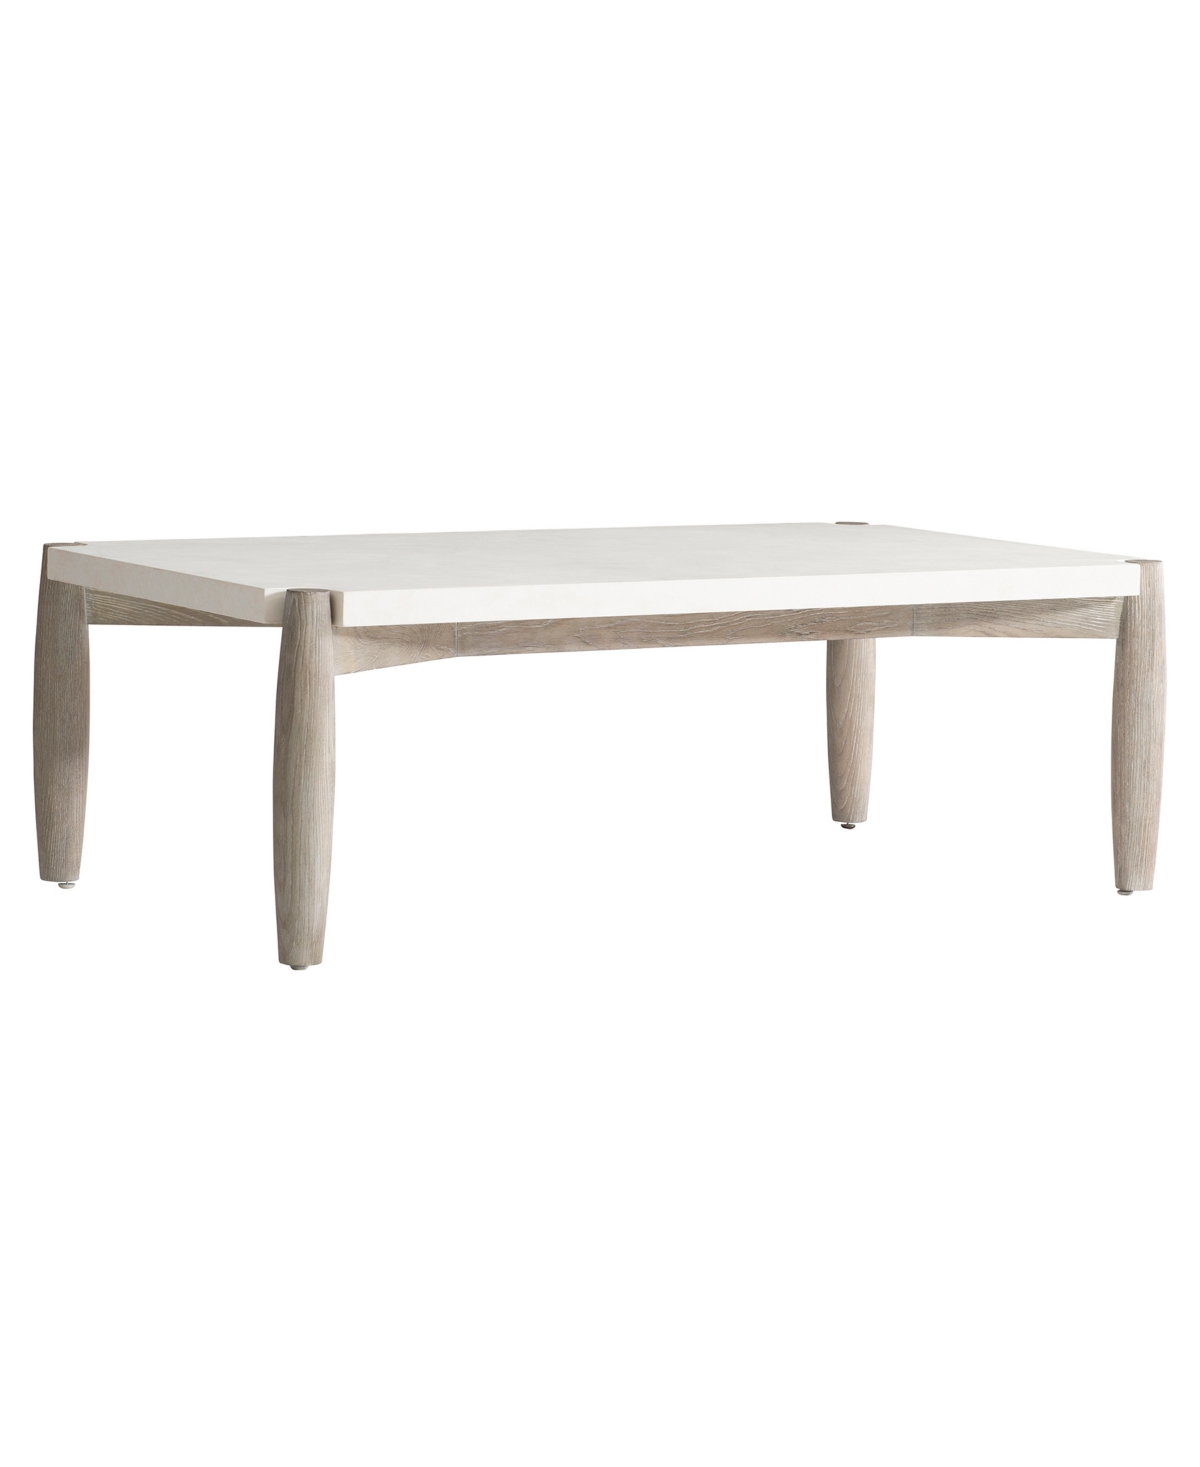 Bernhardt Tycer 54" Stone Cocktail Table In Weathered Greige Base,faux Stone Top